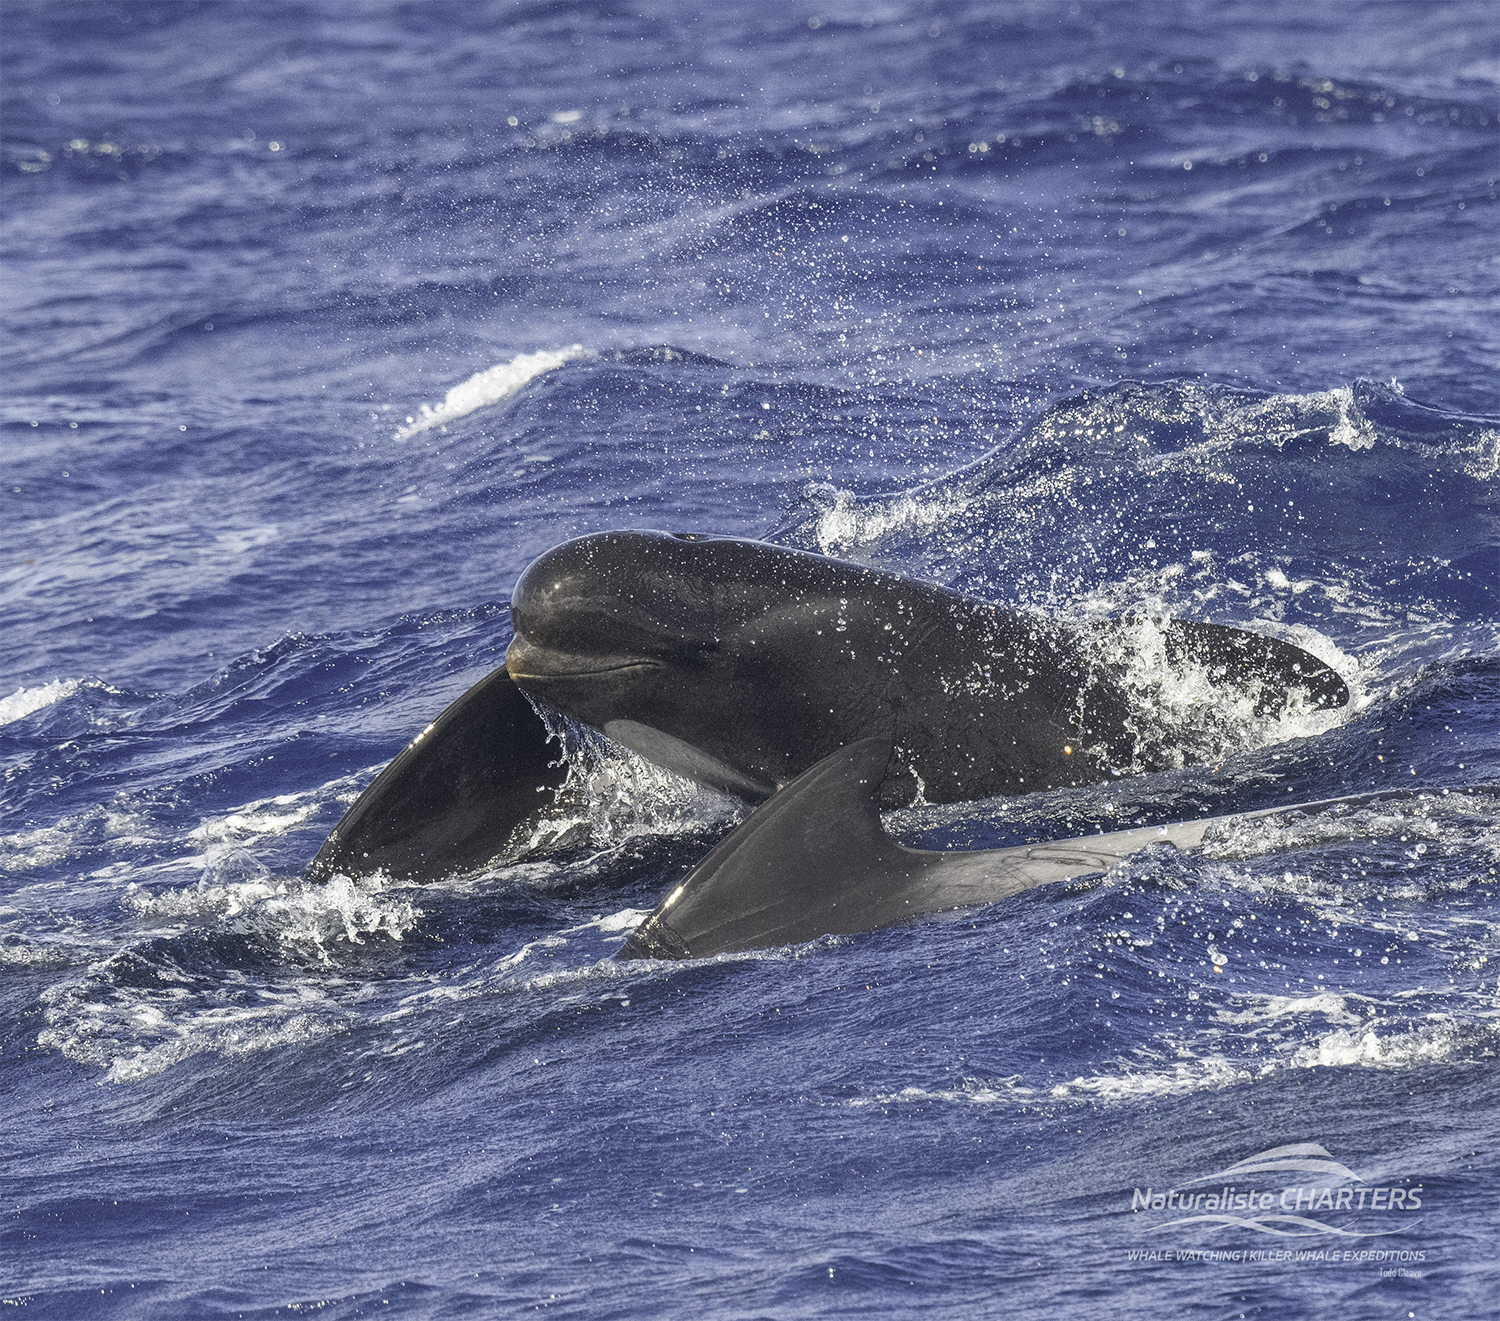 A Day Among Orcas: Tales from the High Seas